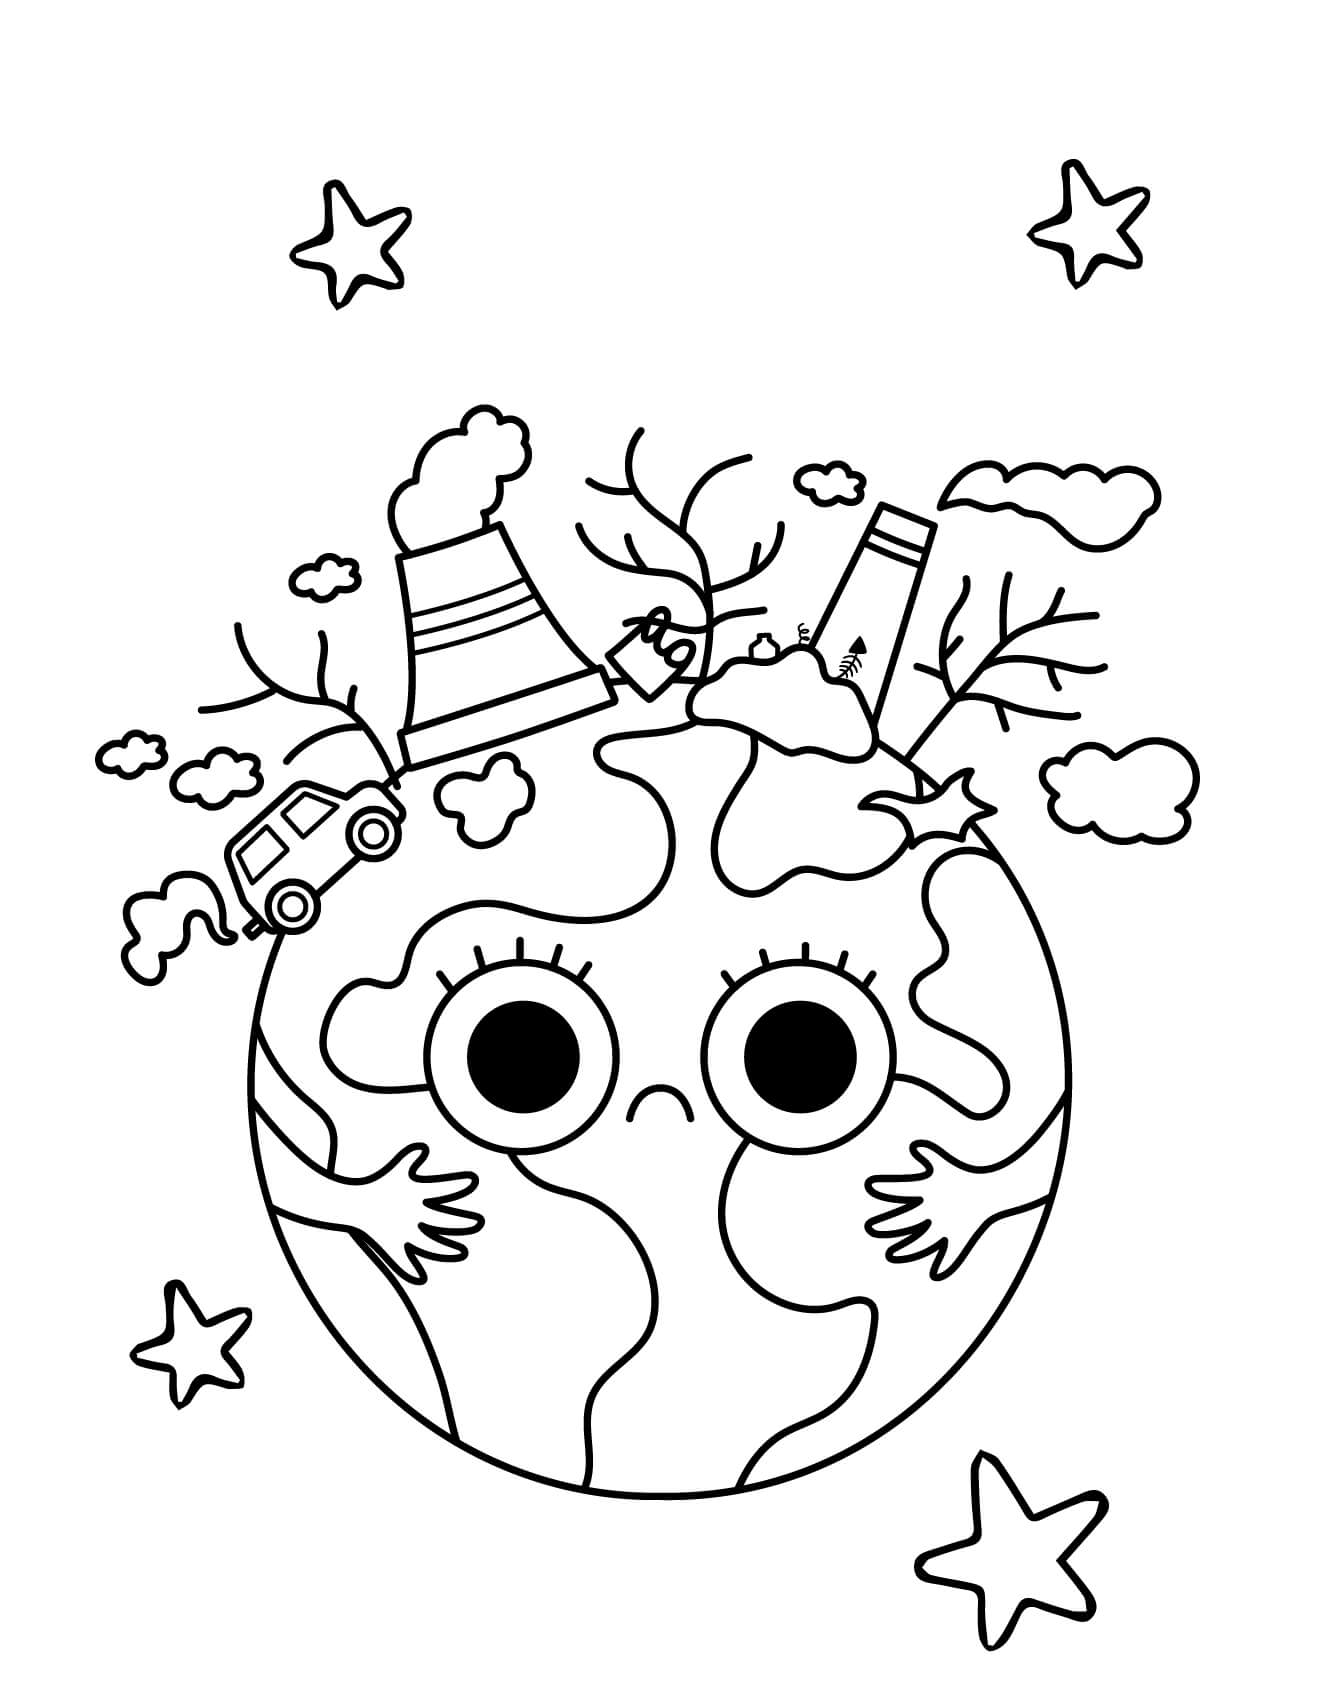 EARTH DAY COLORING PAGES